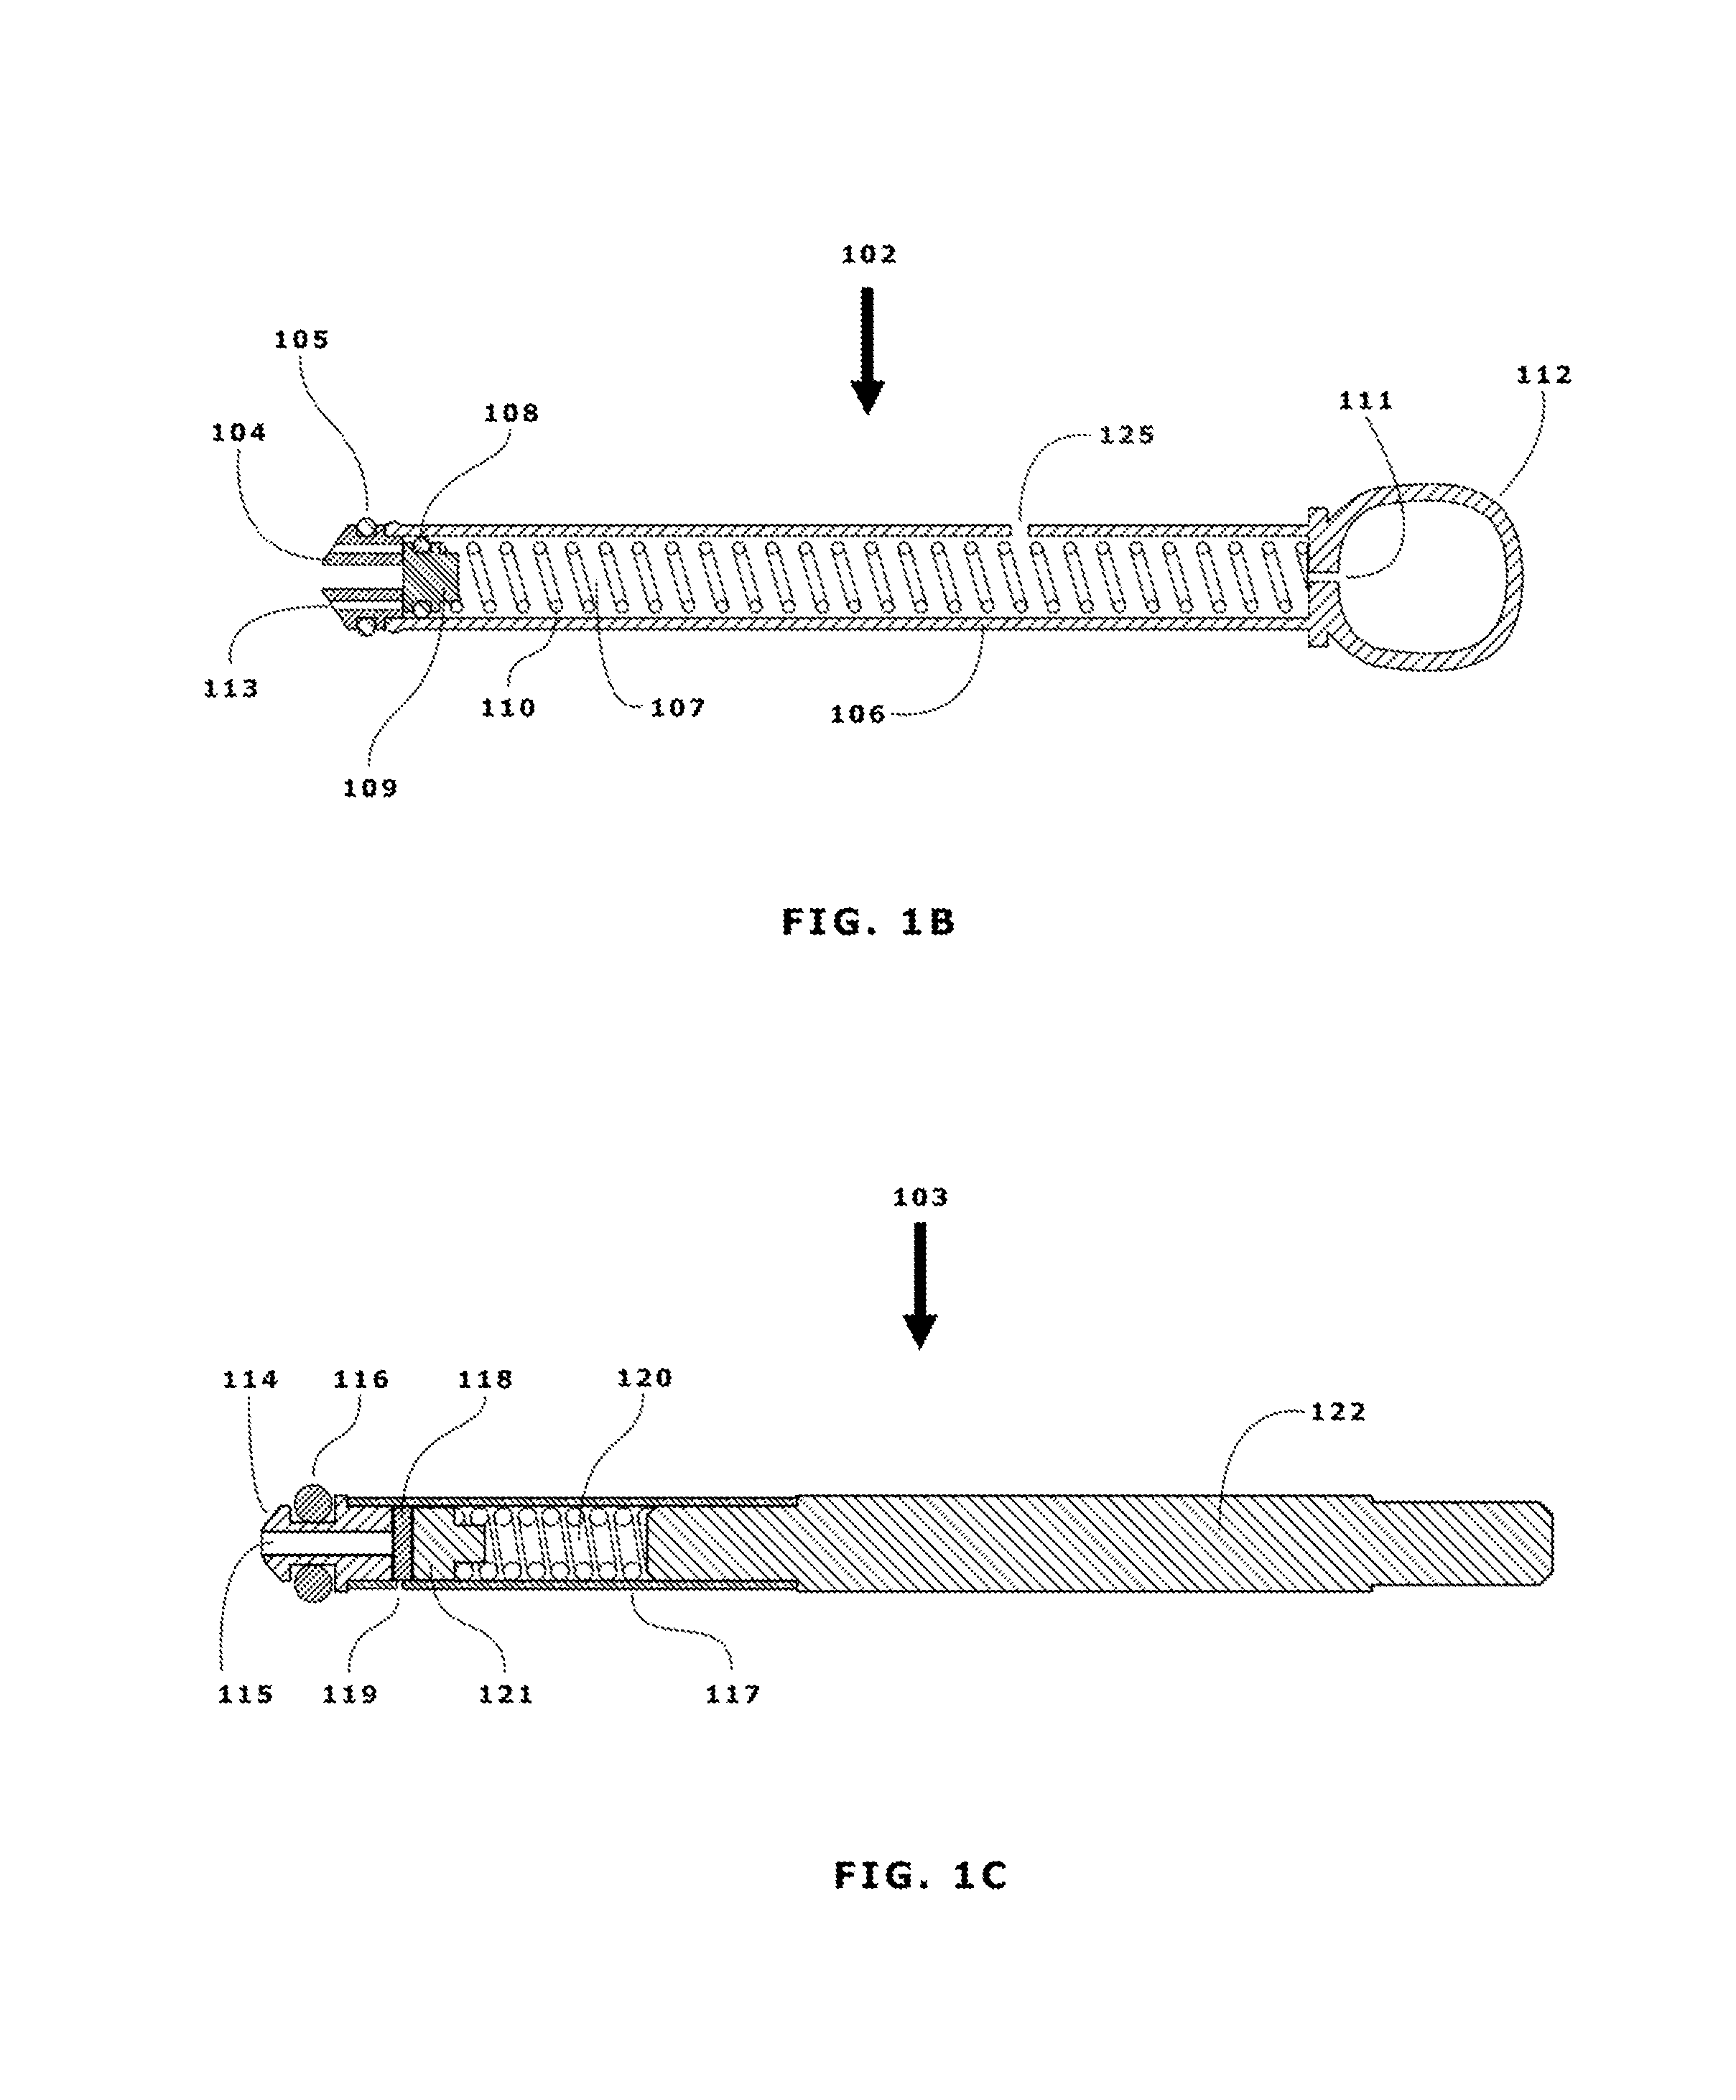 Apparatus and methods for inflating and deflating balloon catheters